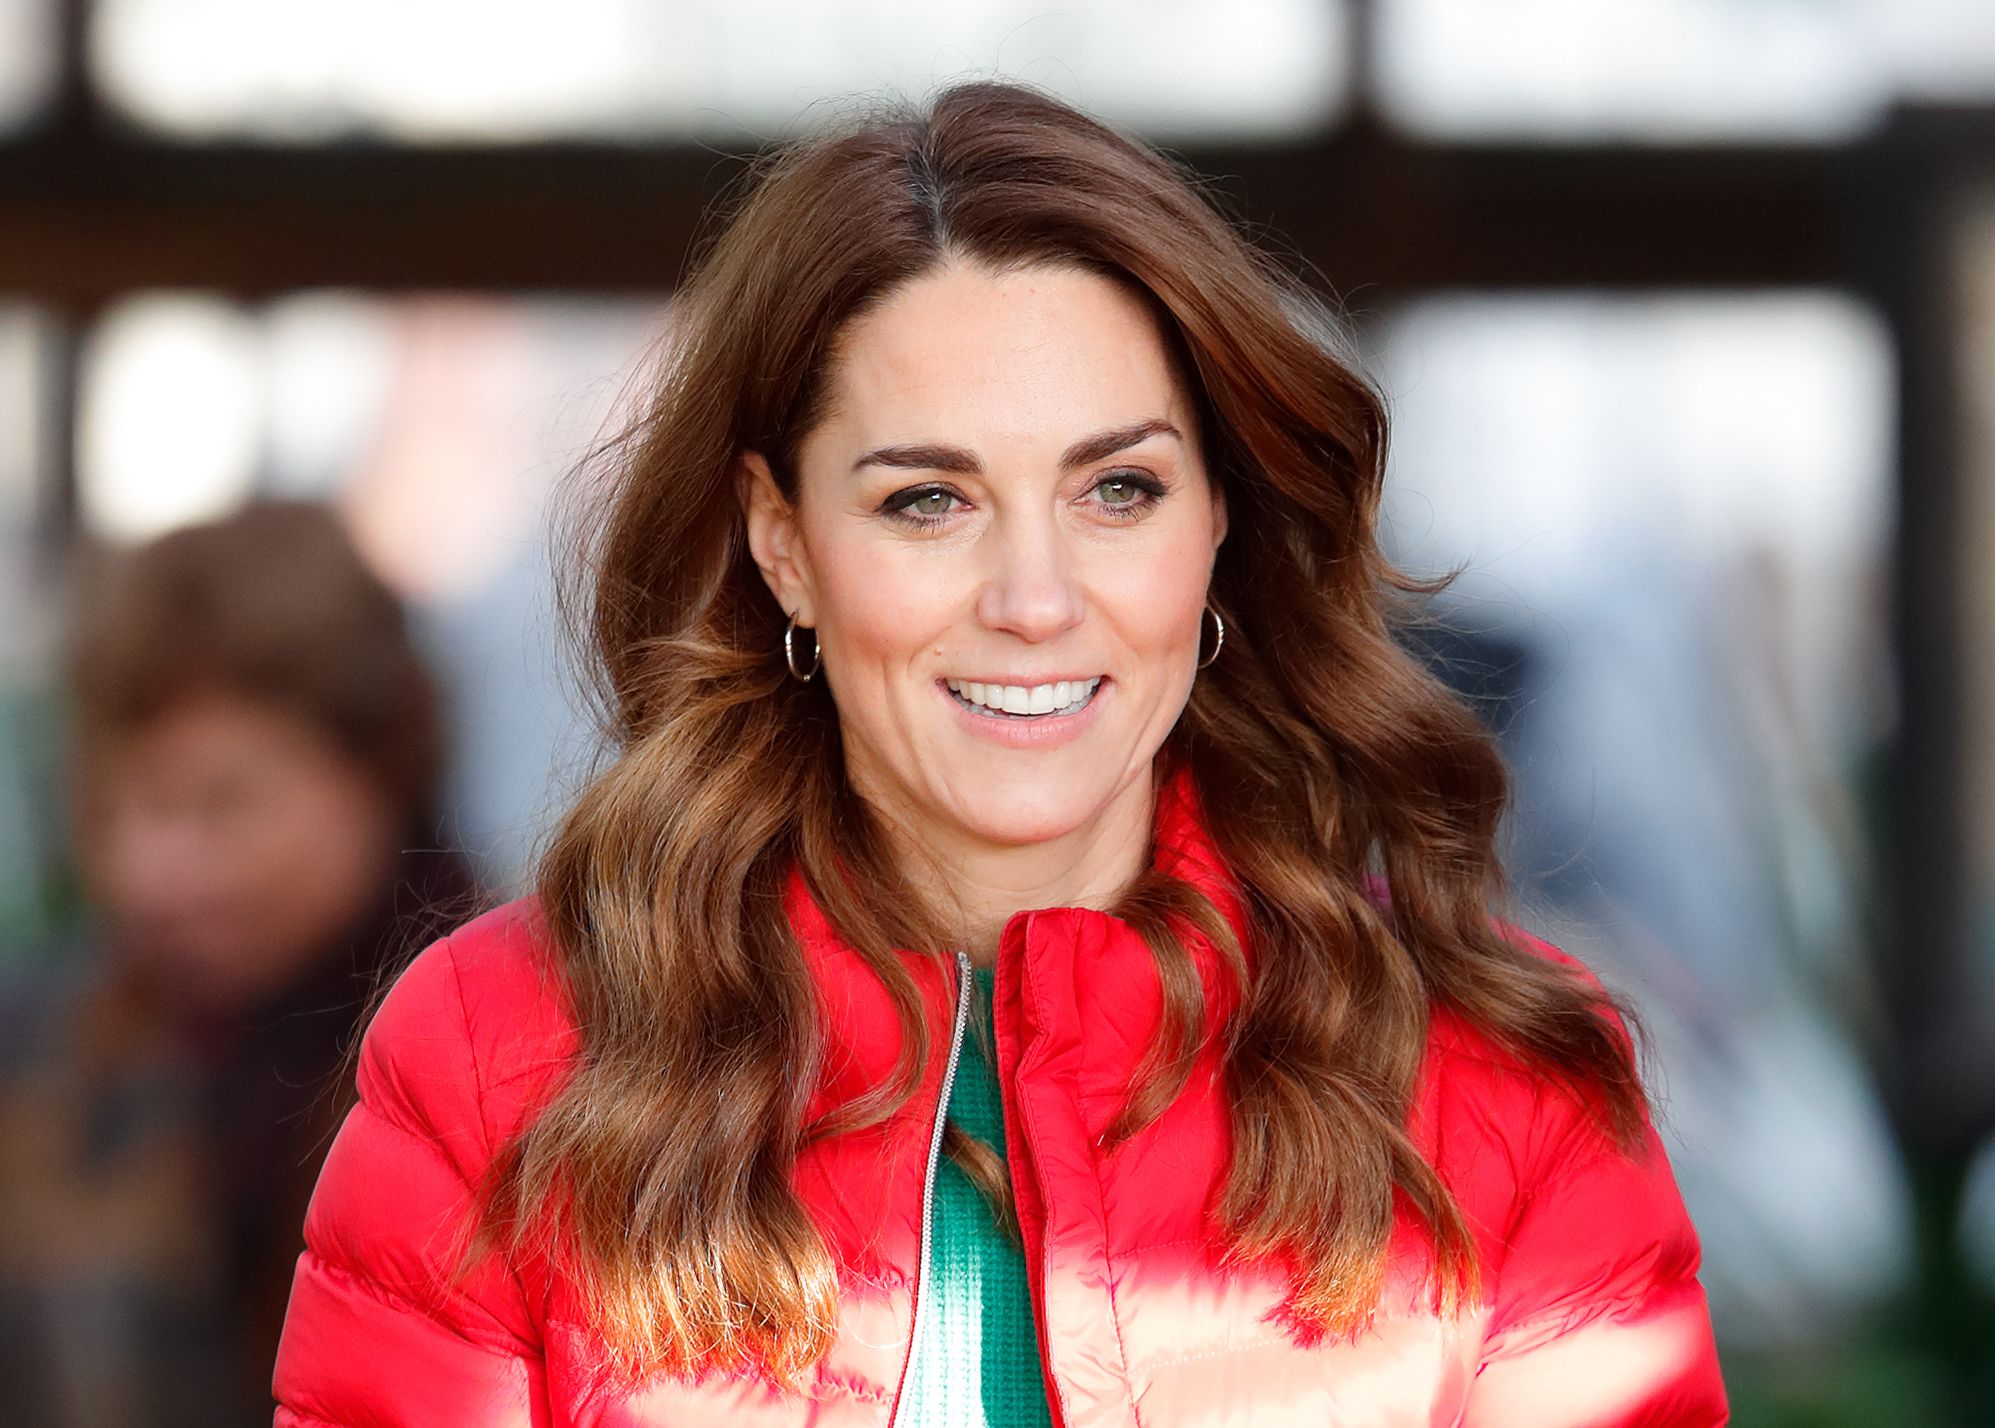 Kate Middleton Wows With Chic New Lockdown Hairstyle